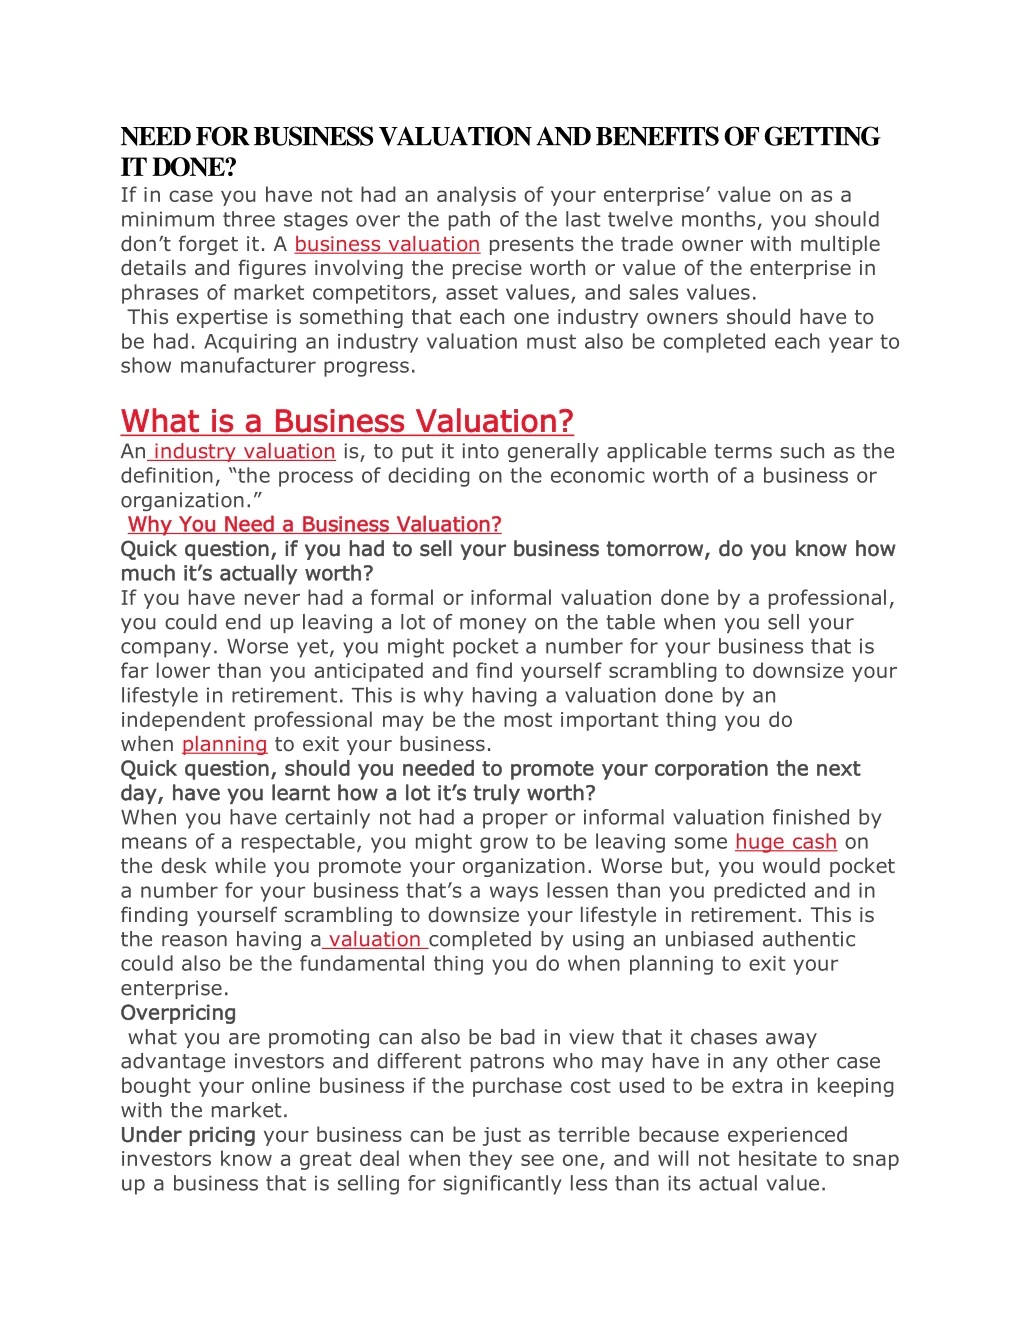 need for business valuation and benefits